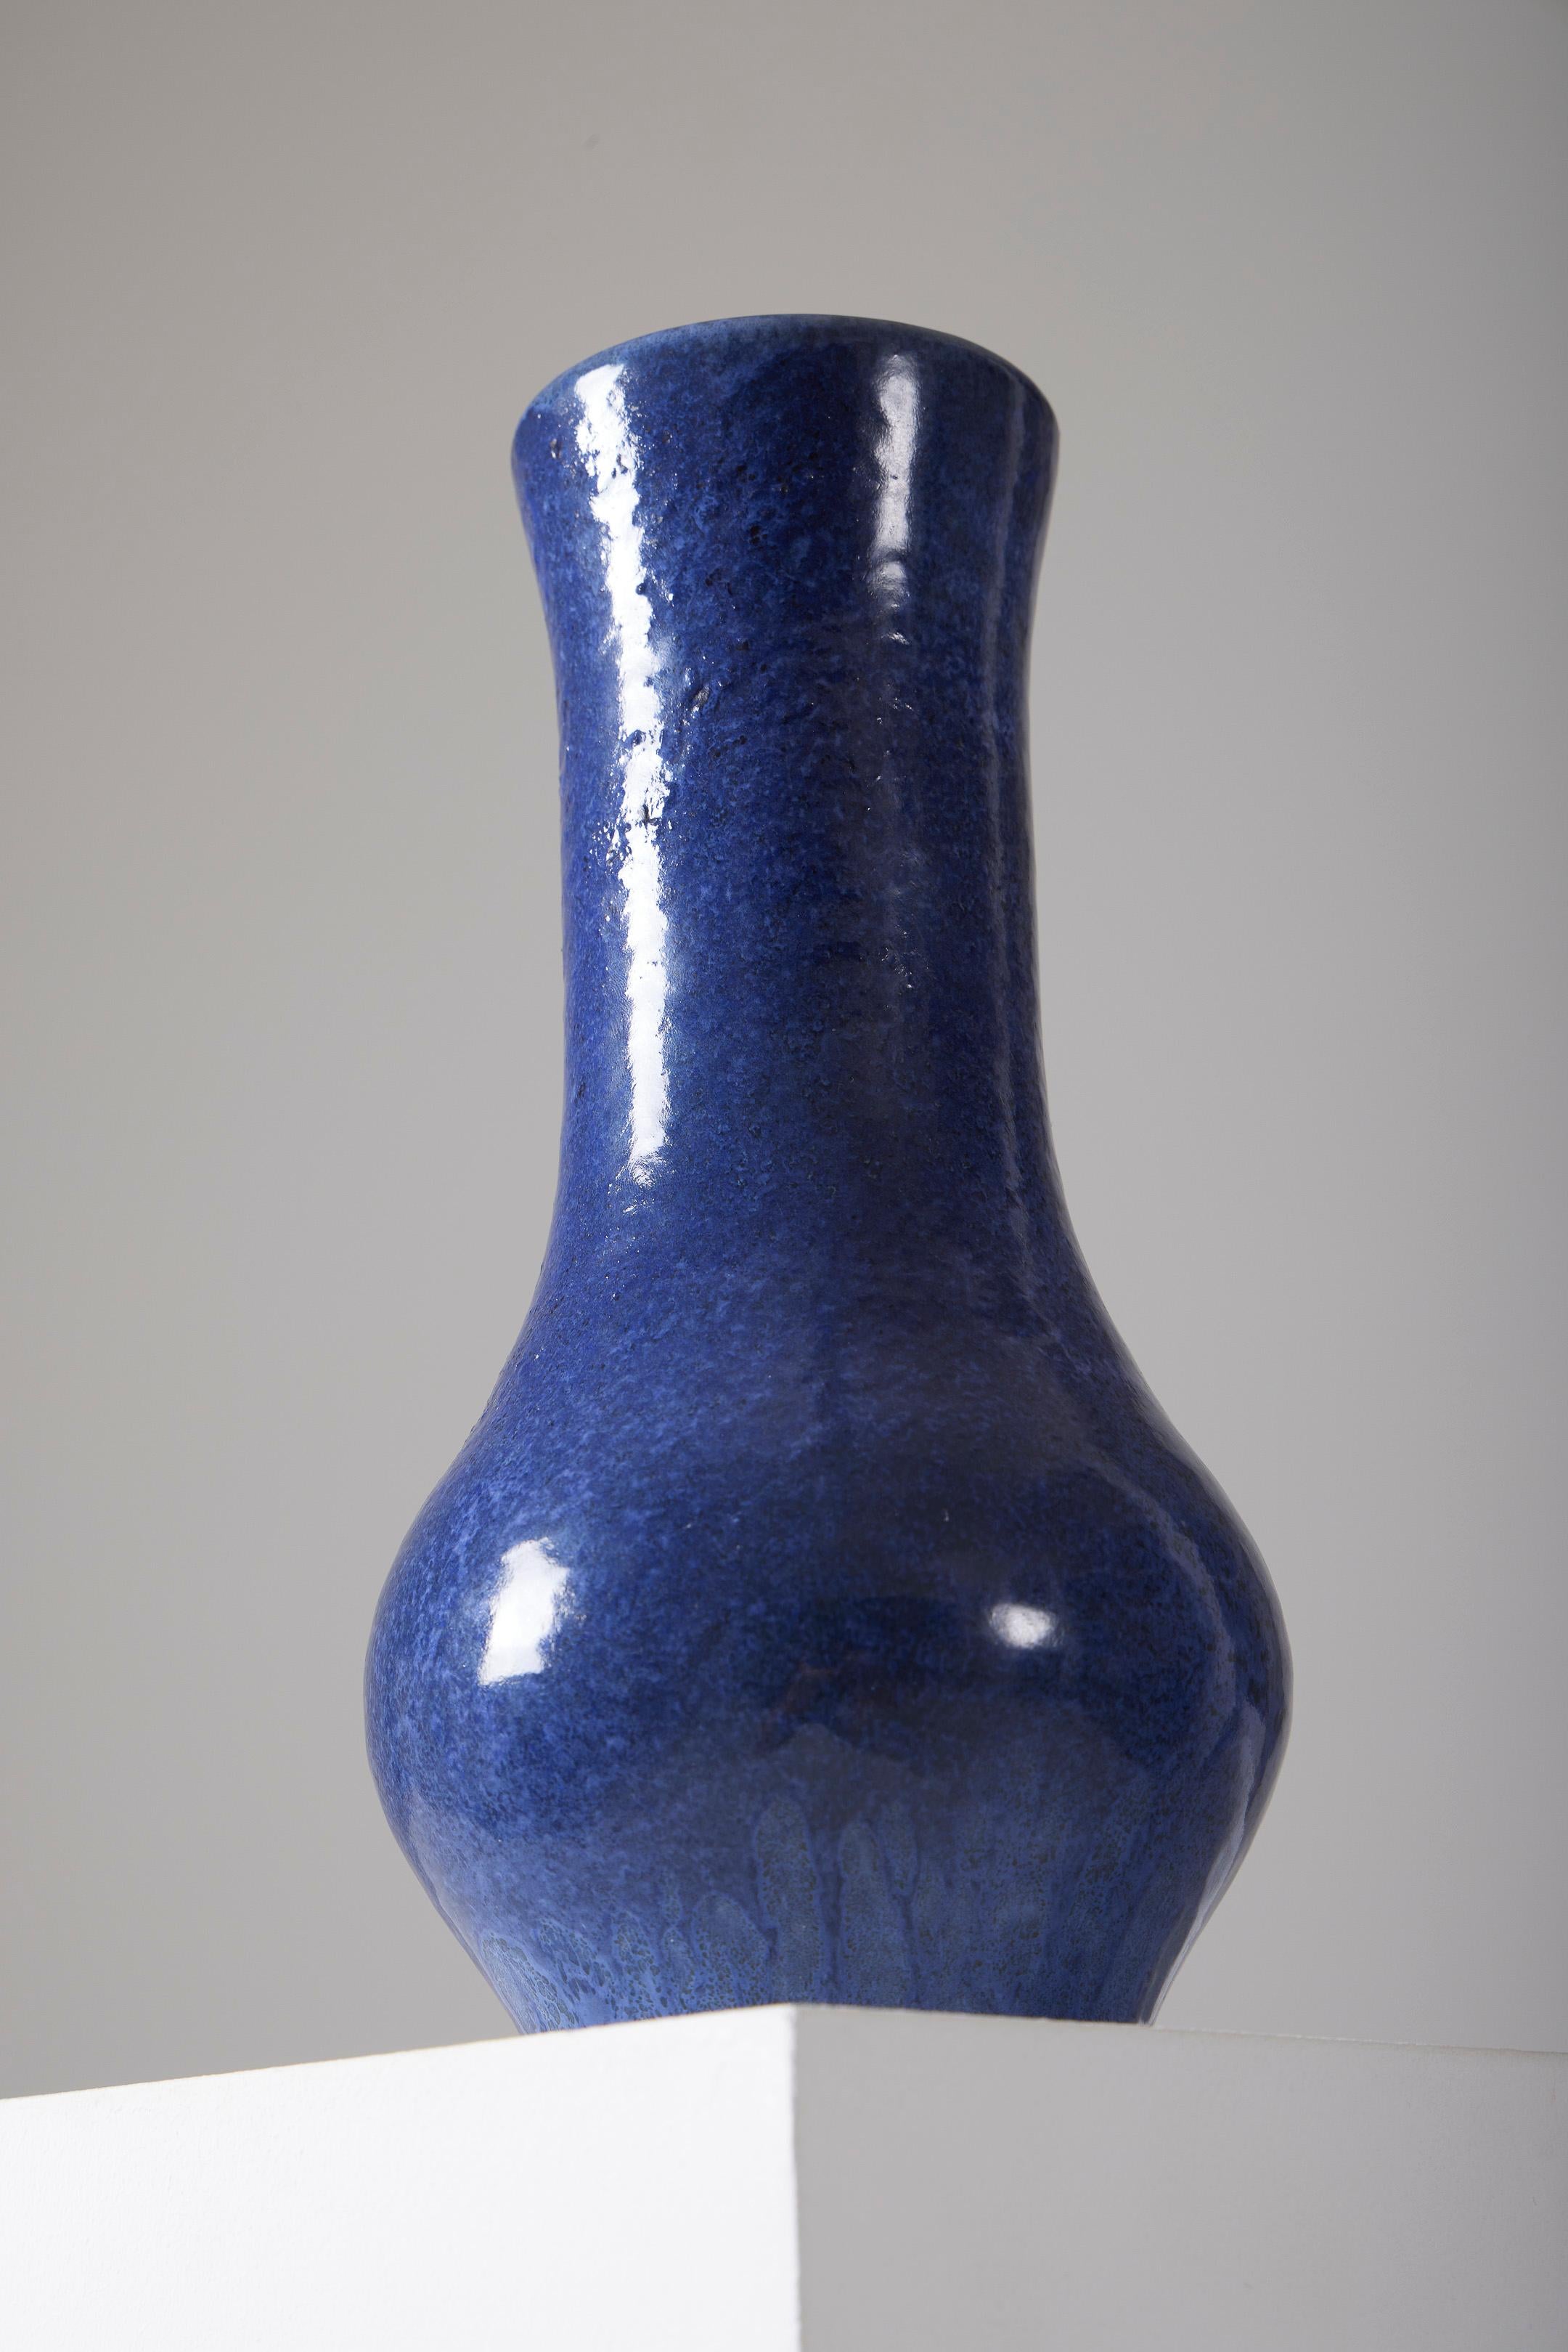 Madoura ceramic vase glazed in blue, beautiful patina from the 1950s. Signed on the back. Excellent condition.
LP3046